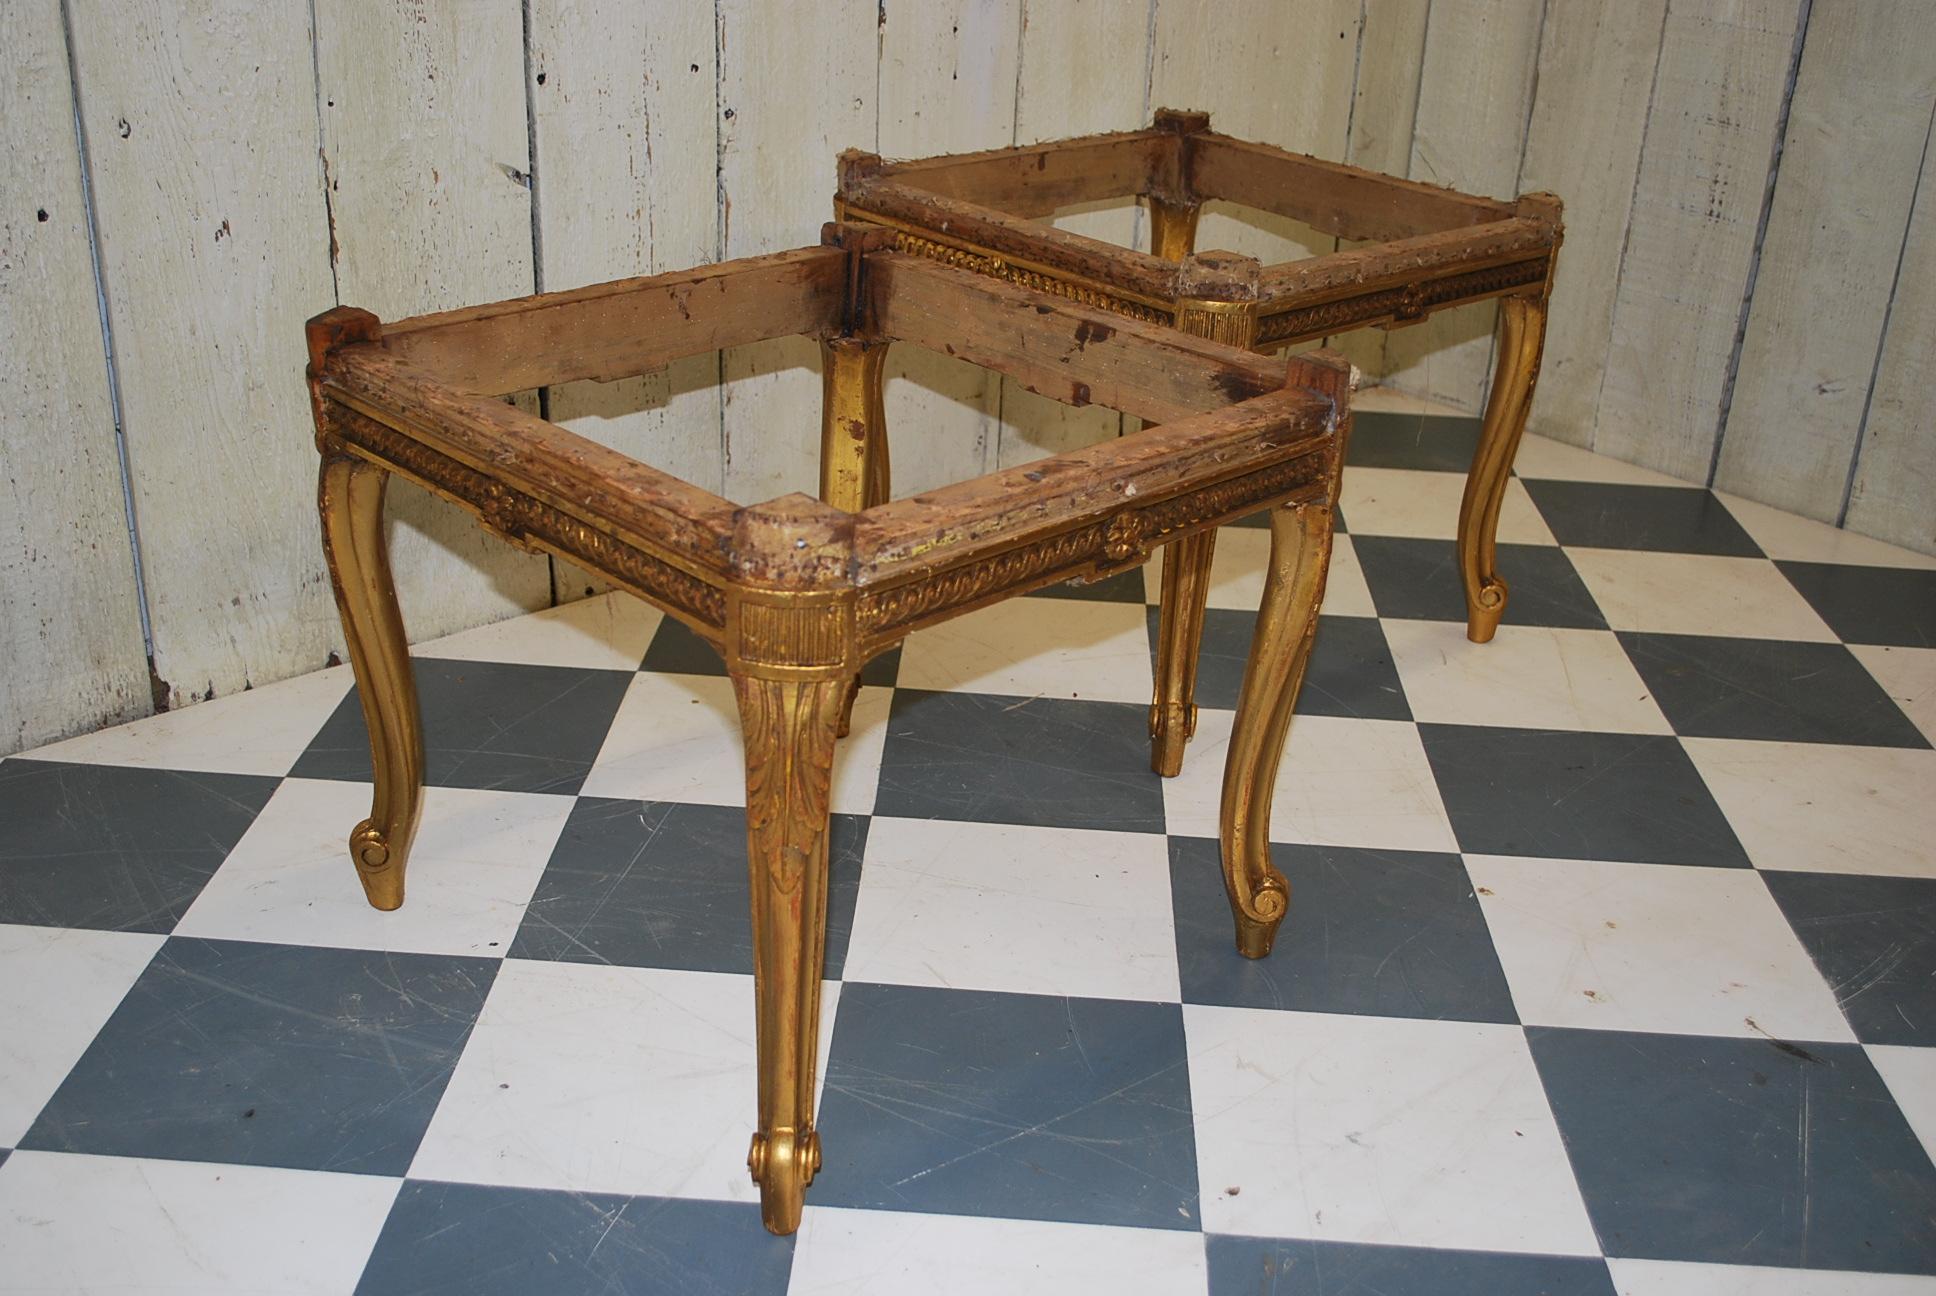 A lovely antique pair of French giltwood stools in the neoclassical taste, ready for re upholstery. Structurally sound and ready for covering in fabric. The pair come with original horse hair swabs.